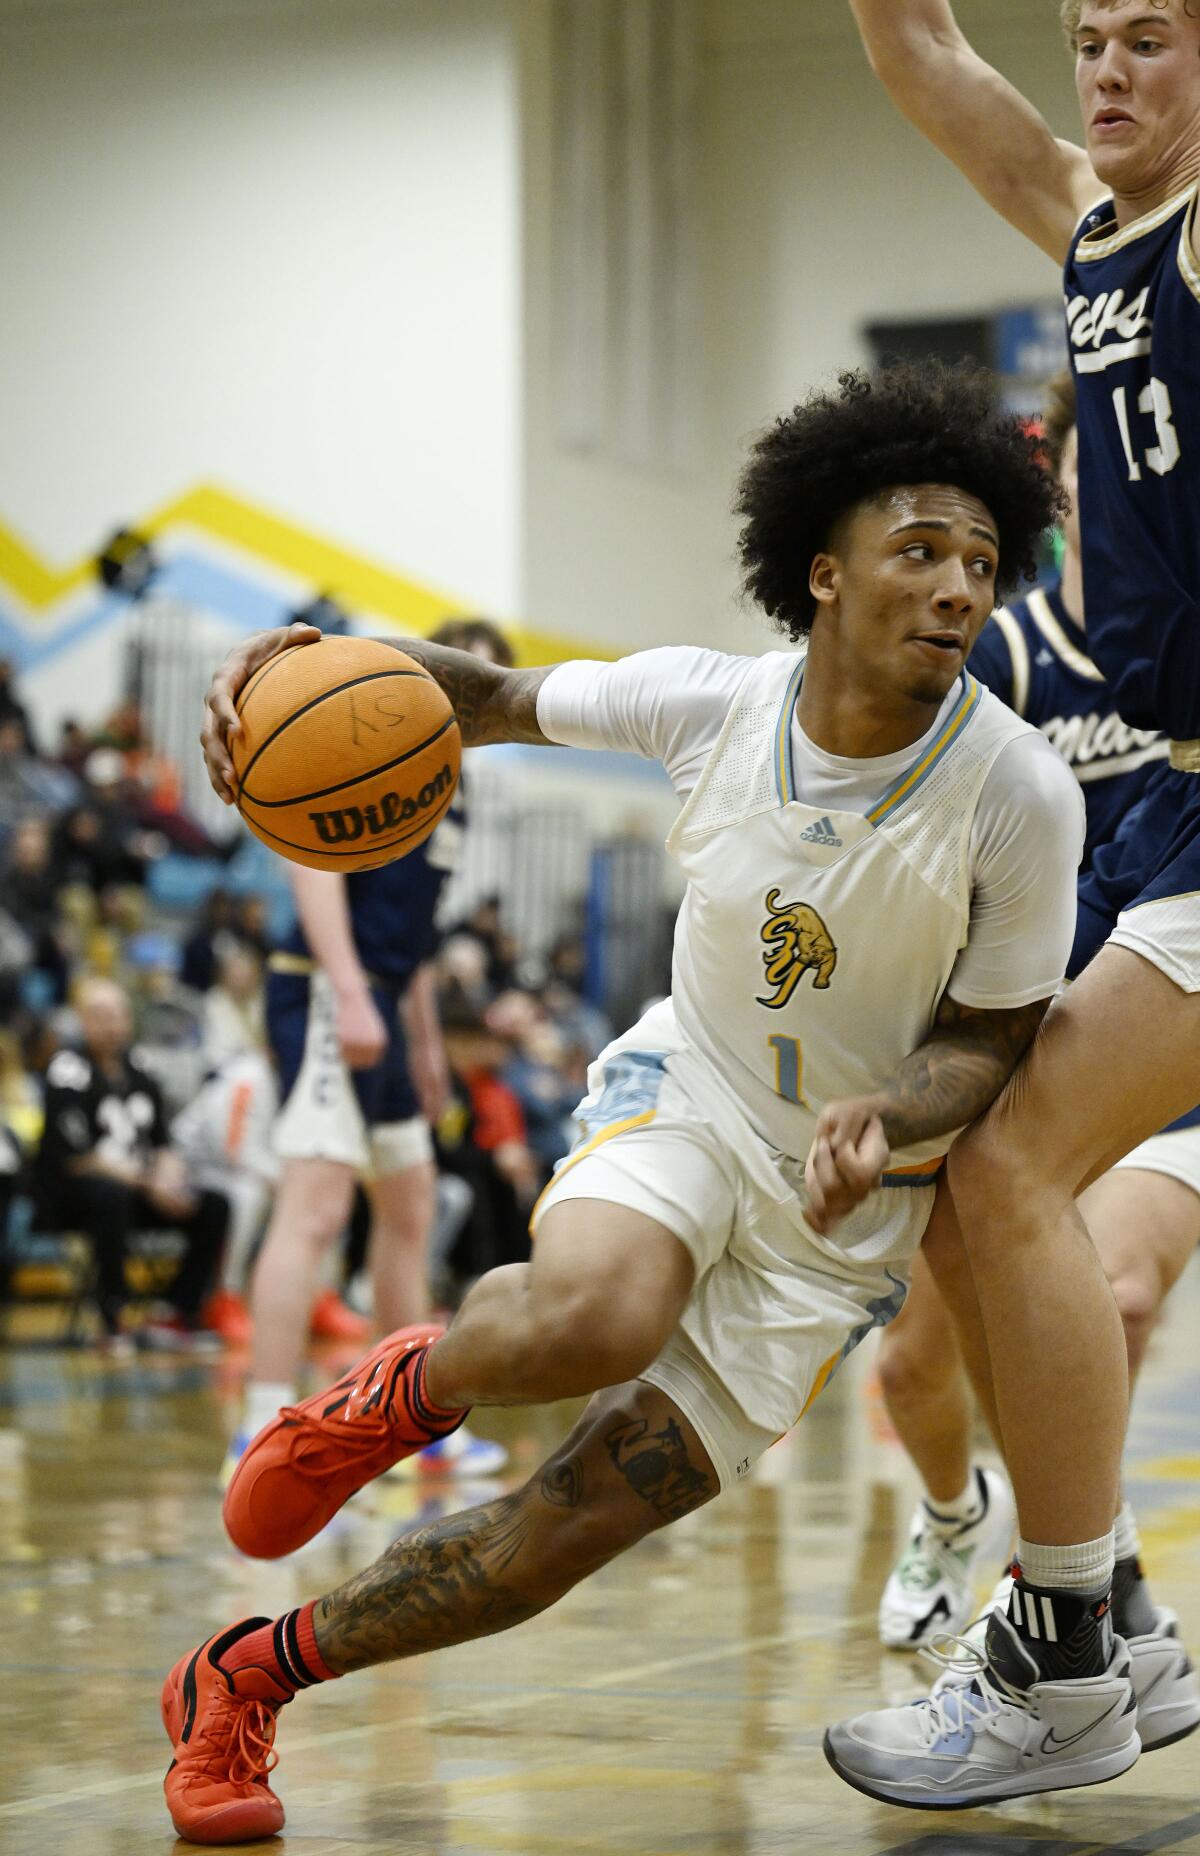 High school basketball: Mikey Williams comes to down